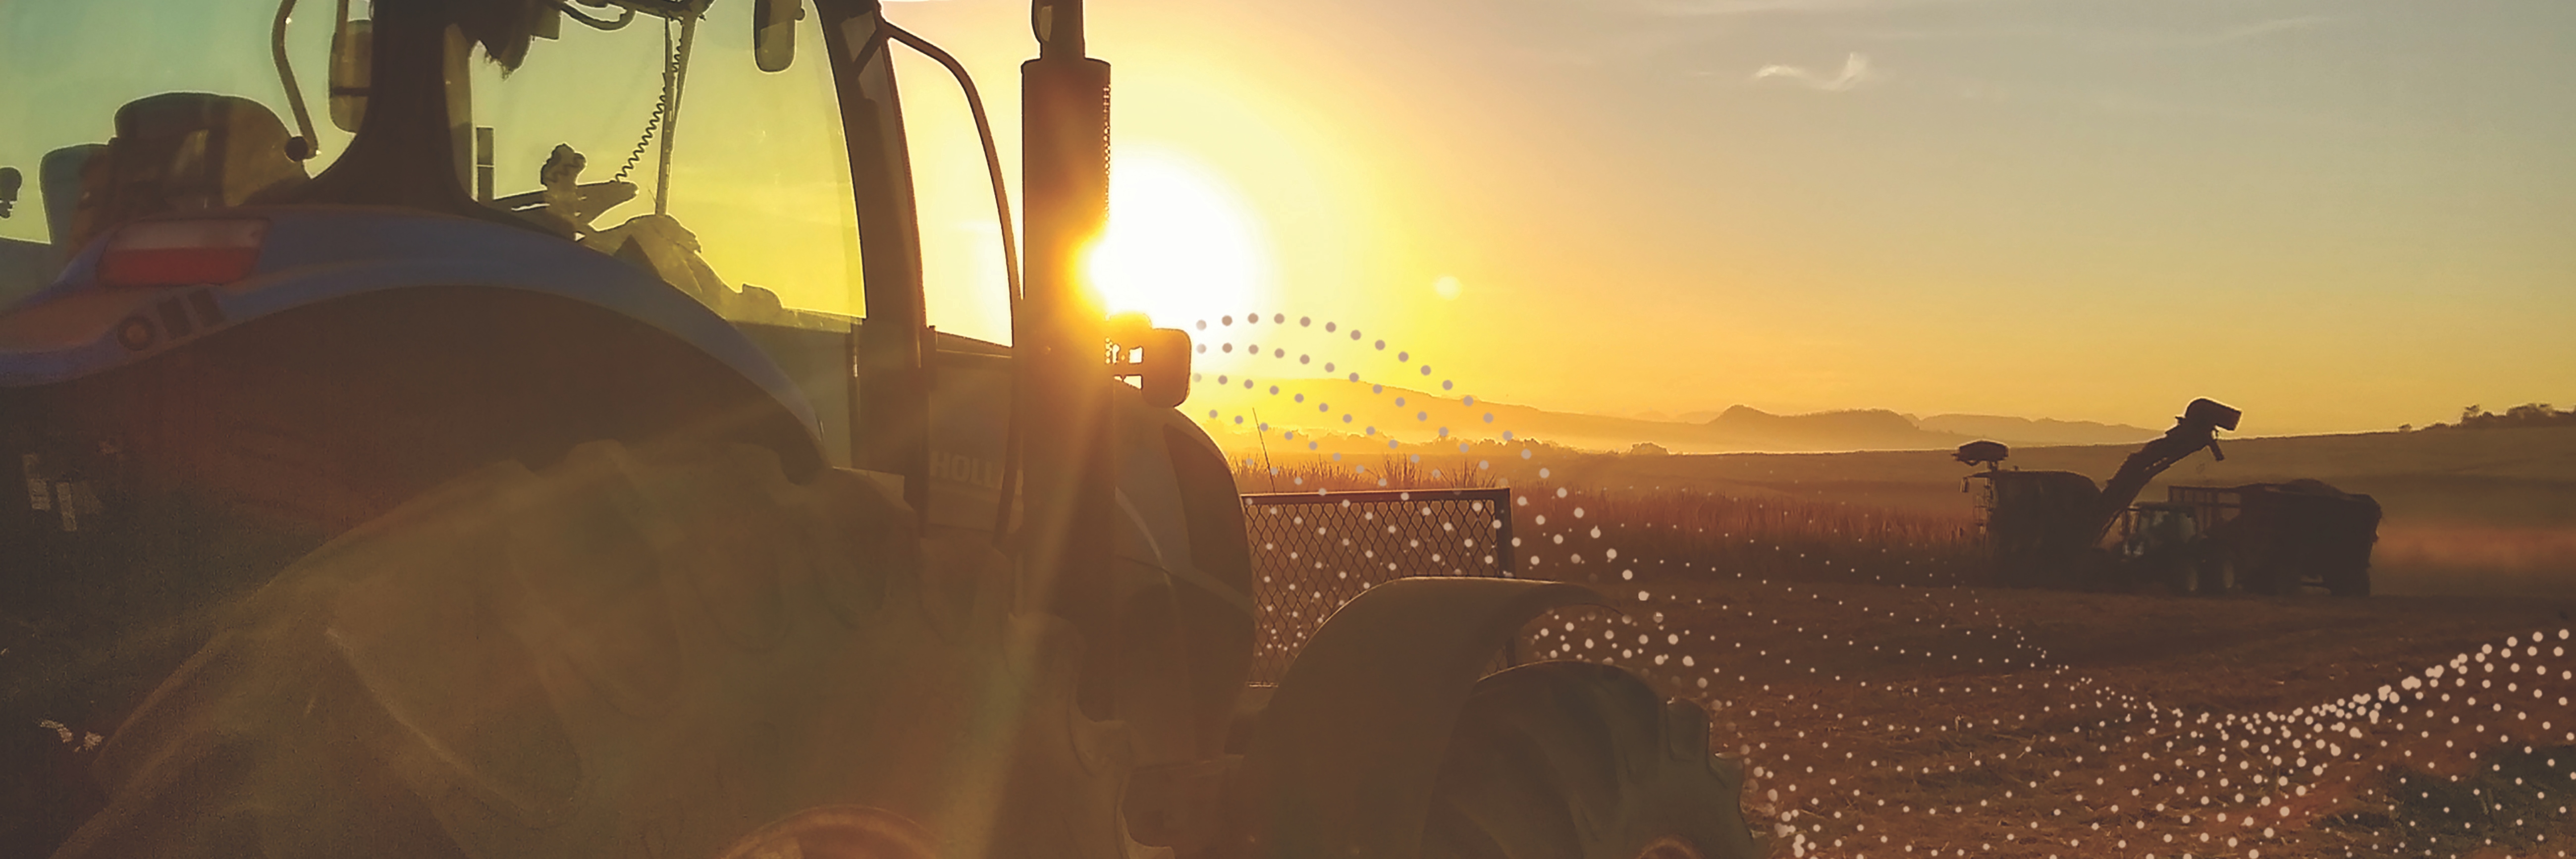 Farm equipment in field at sunset